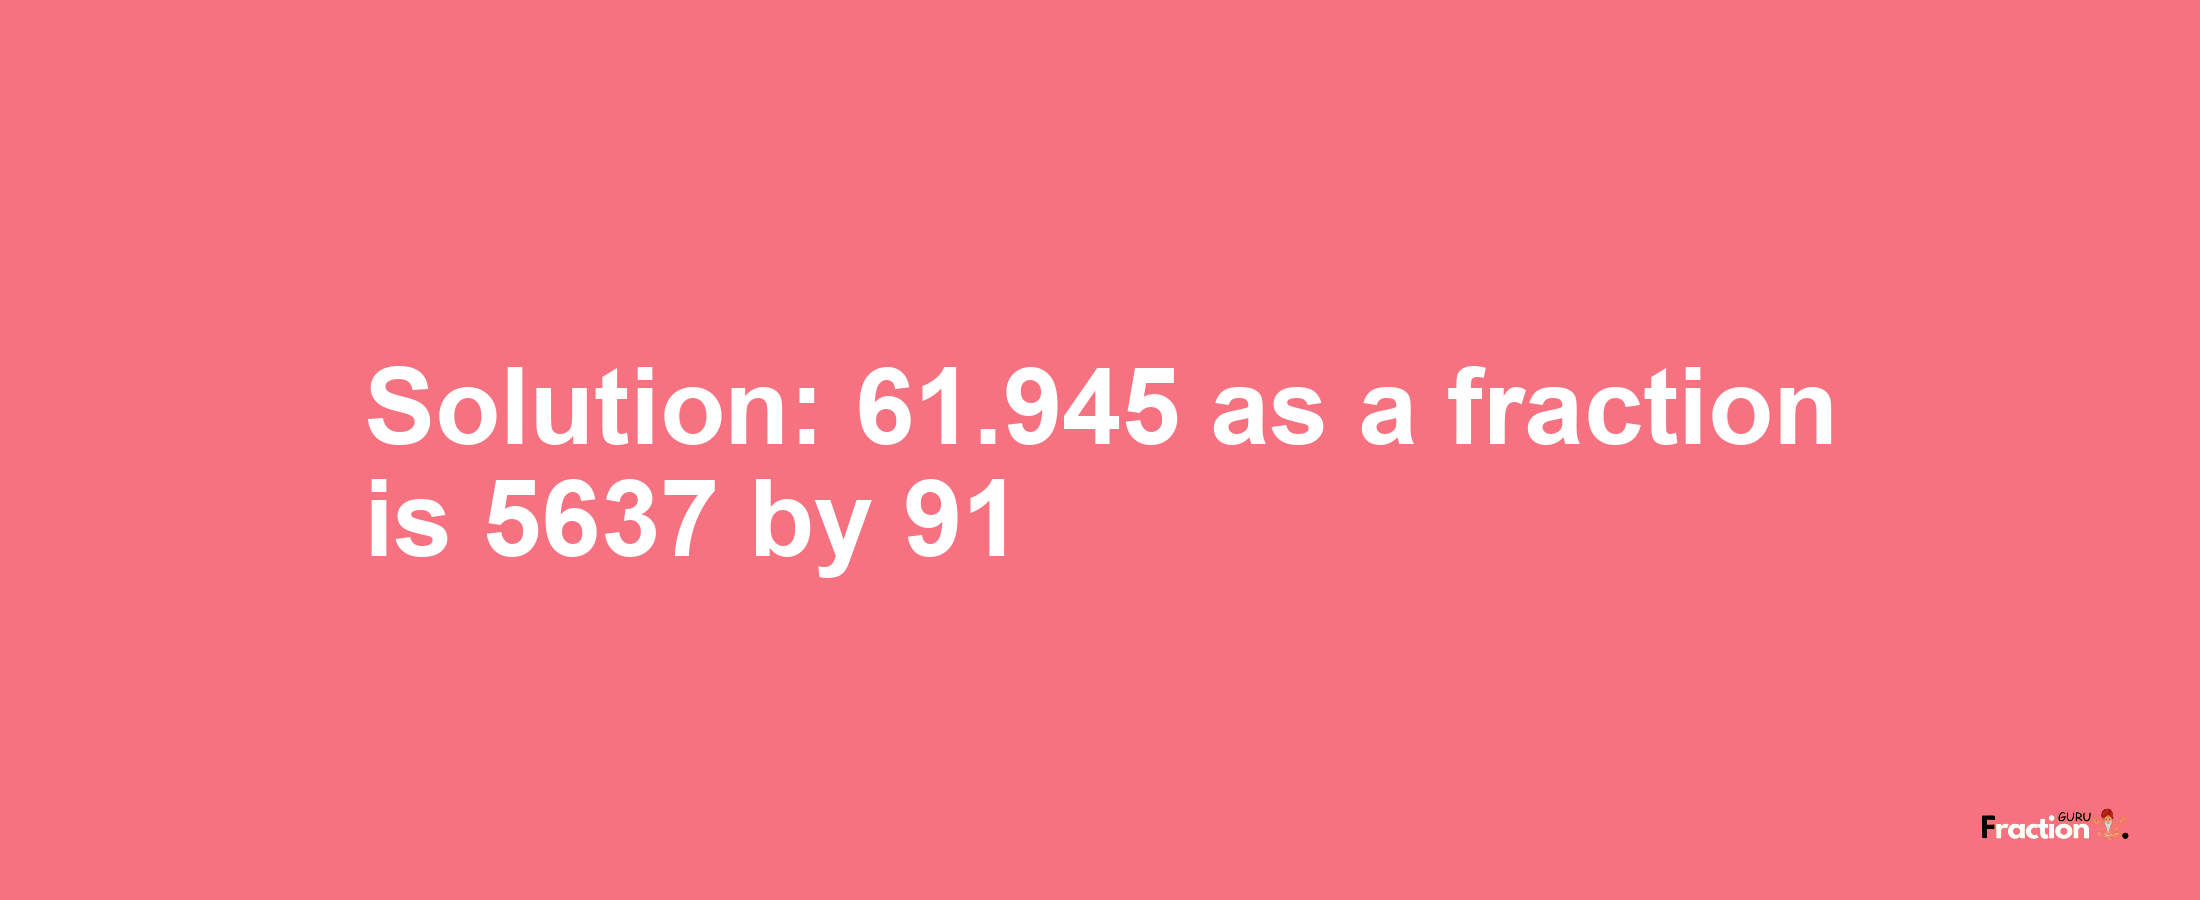 Solution:61.945 as a fraction is 5637/91